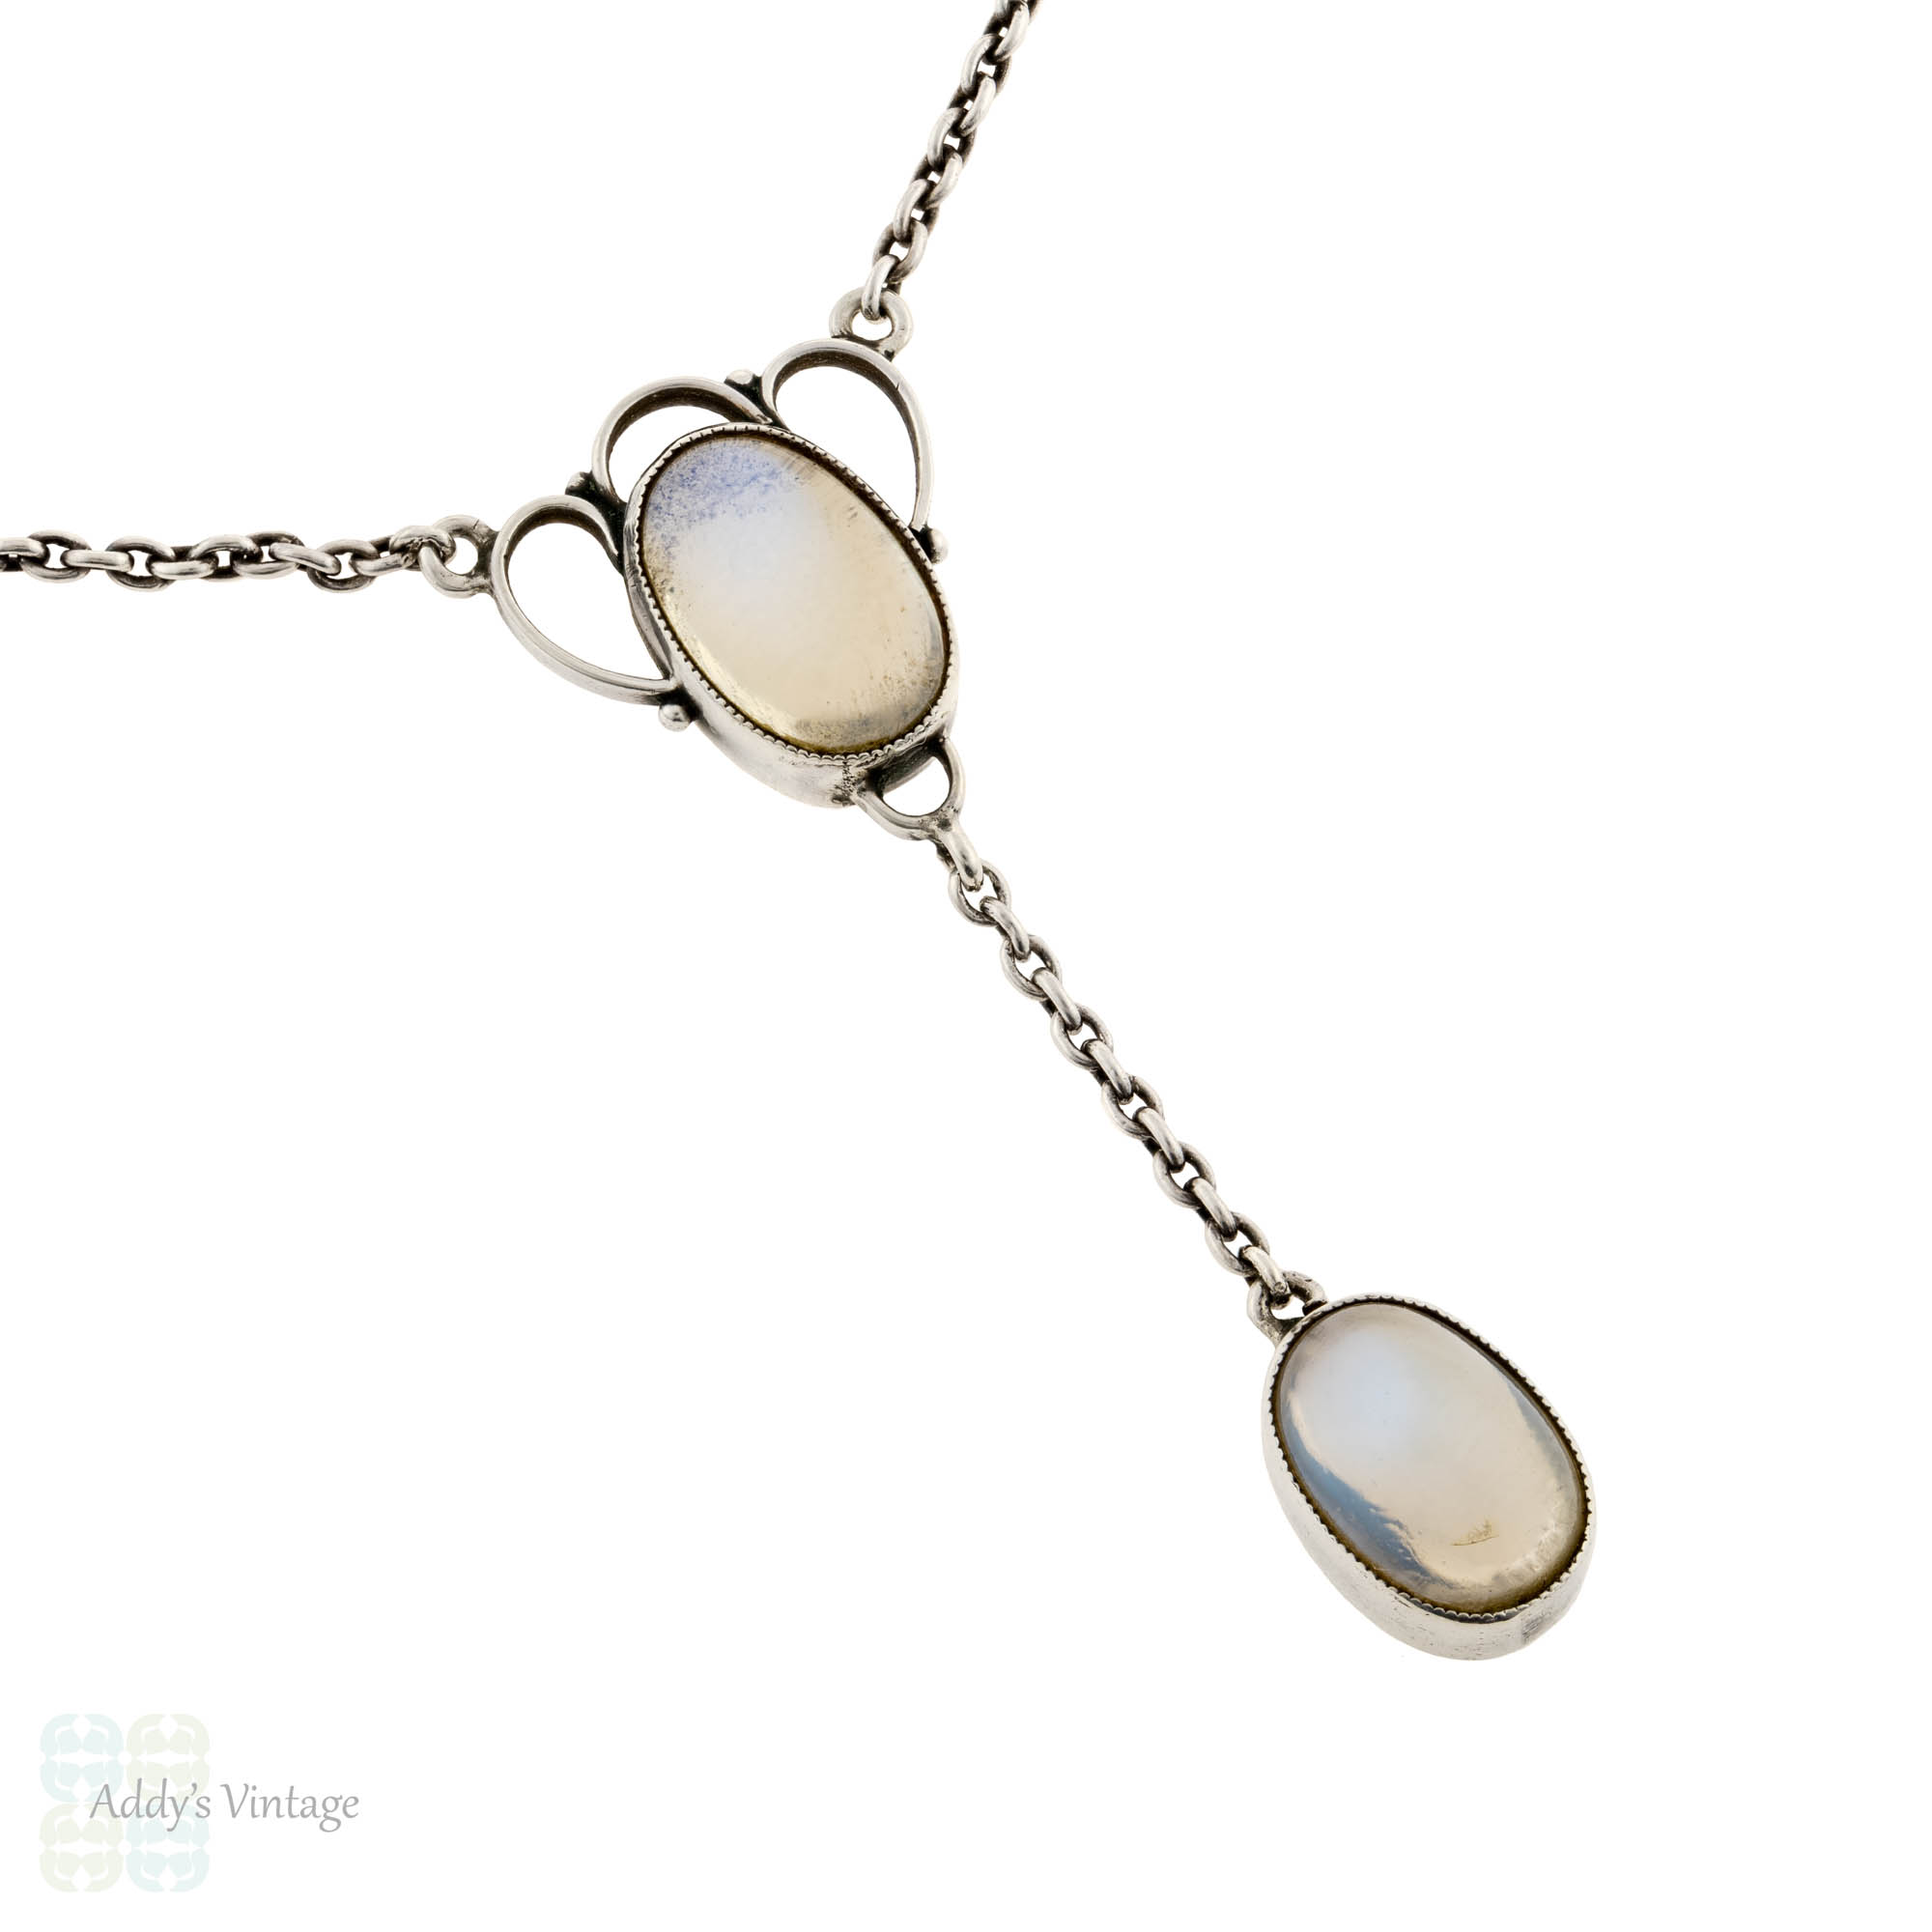 Vintage Moonstone Pendant & New Sterling Silver Chain – my frugal father